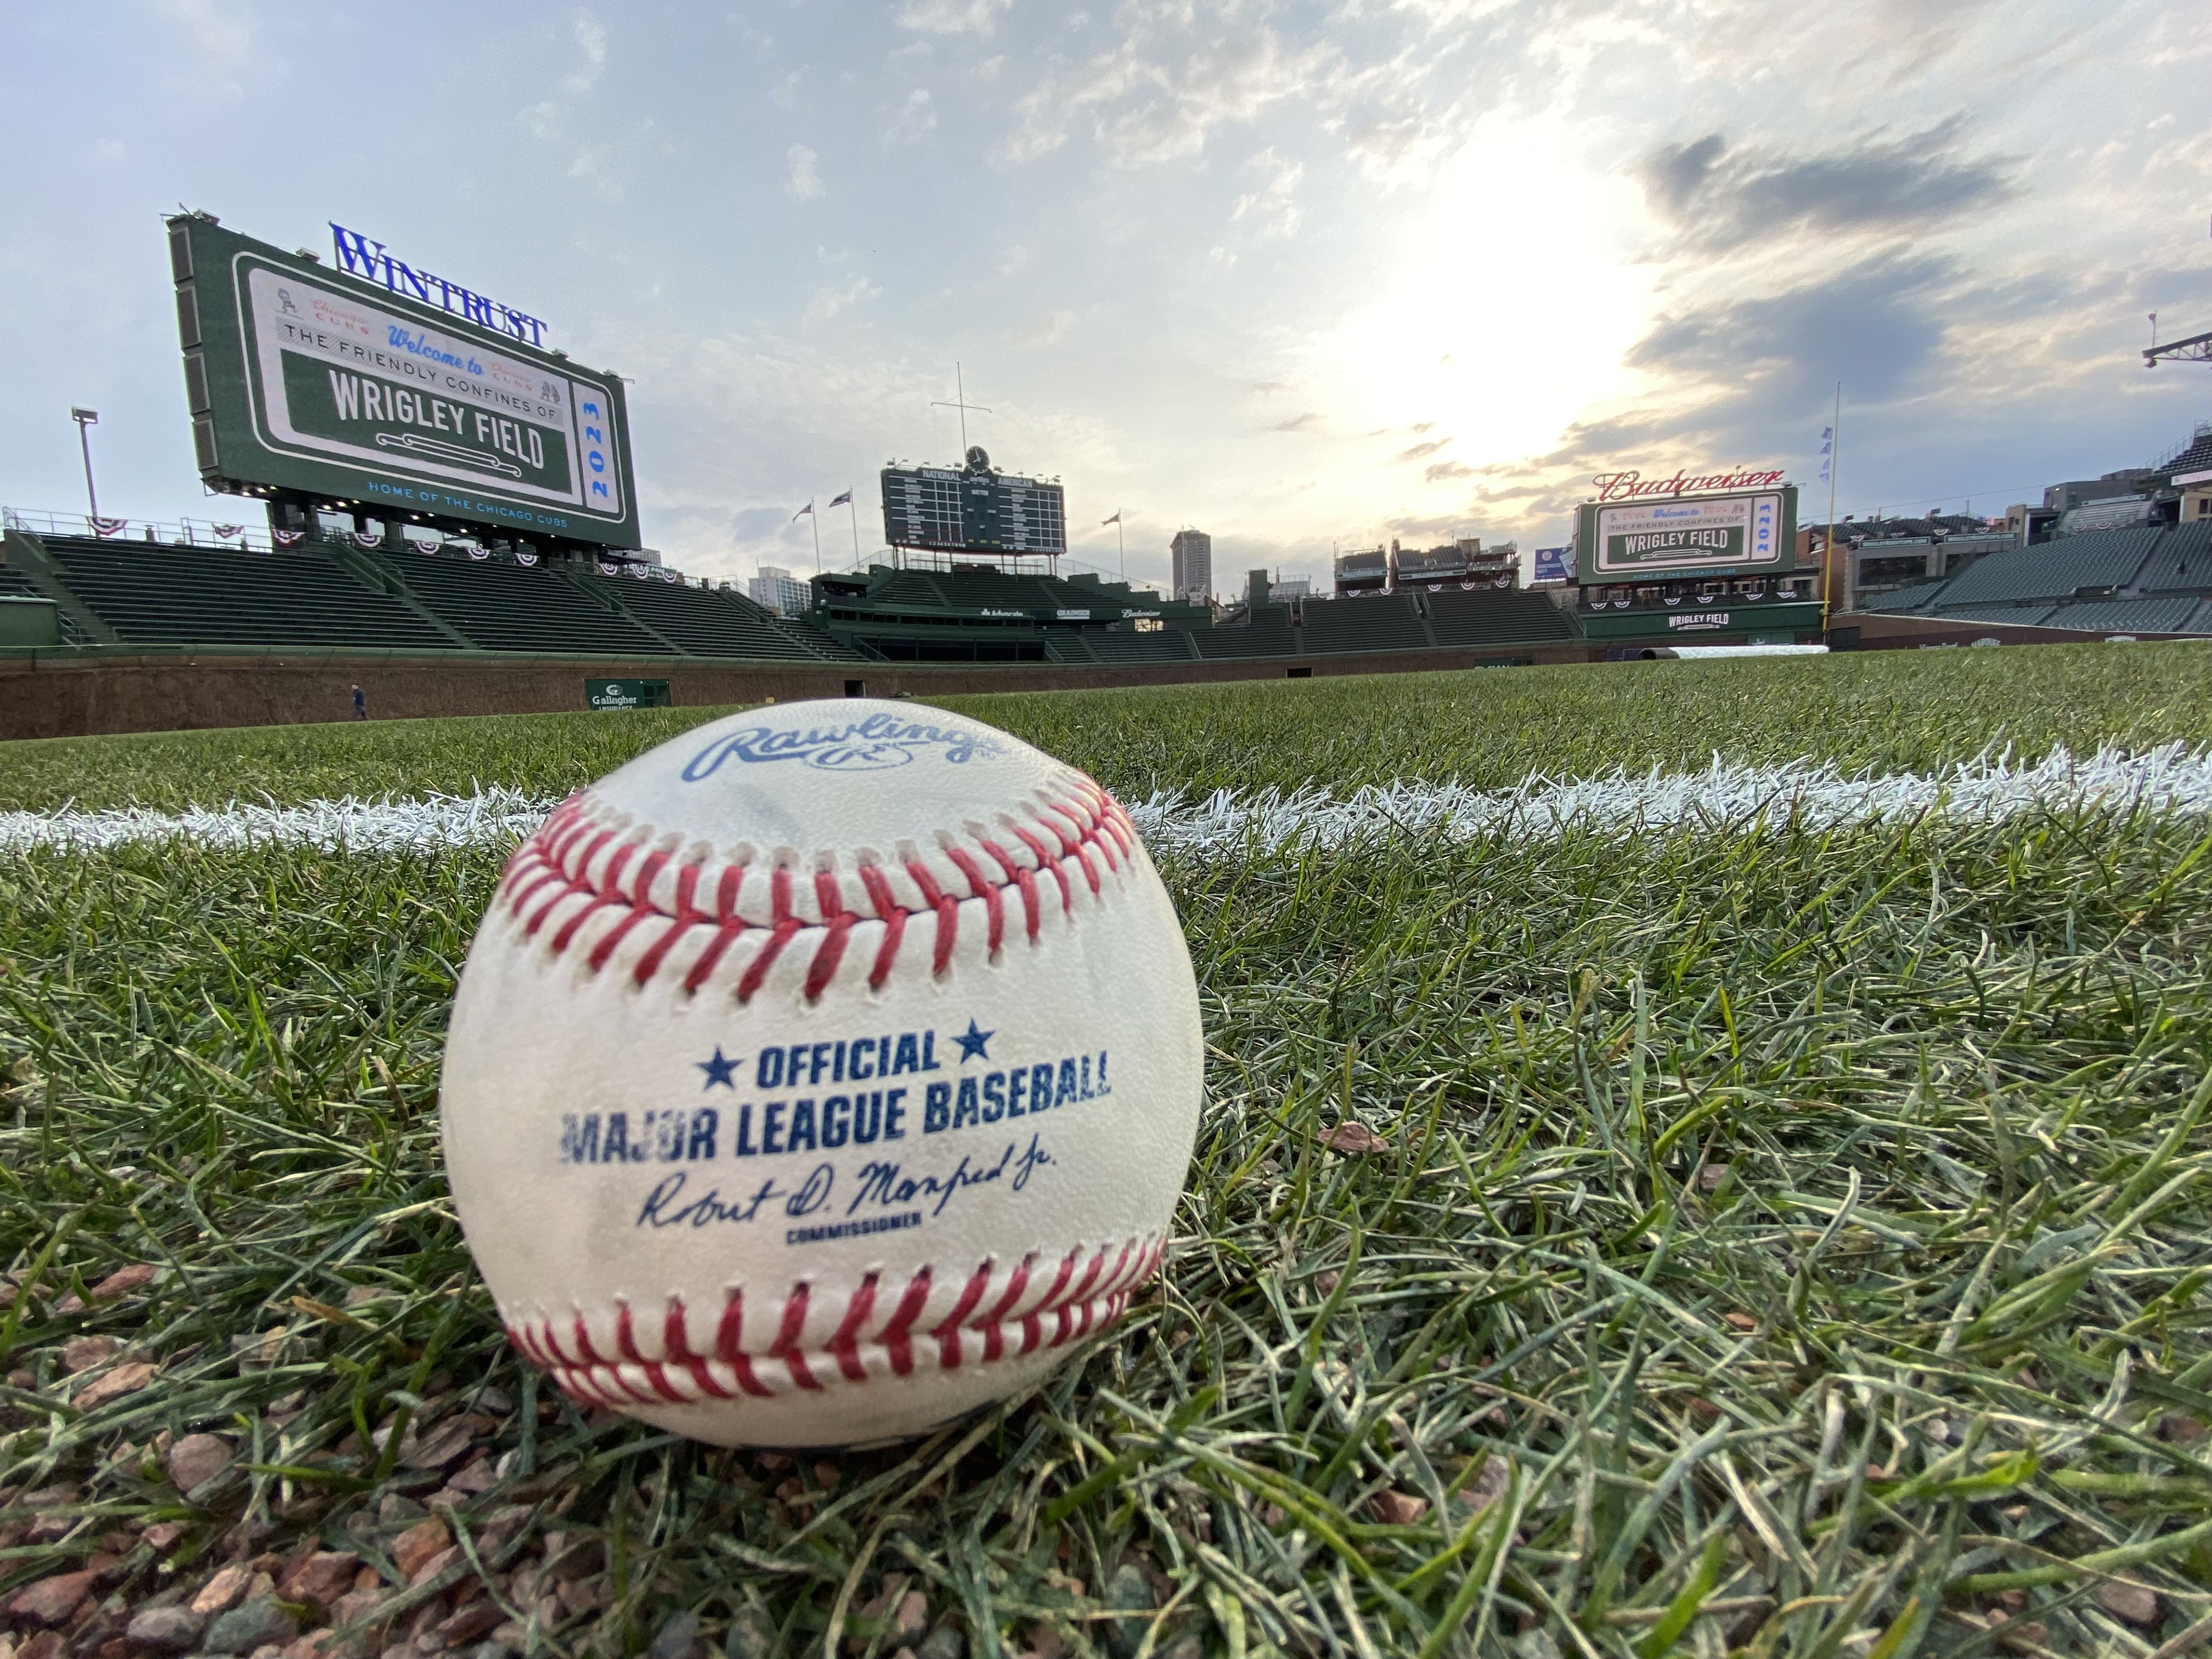 2023 Opening Day: Guide to Chicago Cubs 2023 Home Opener at